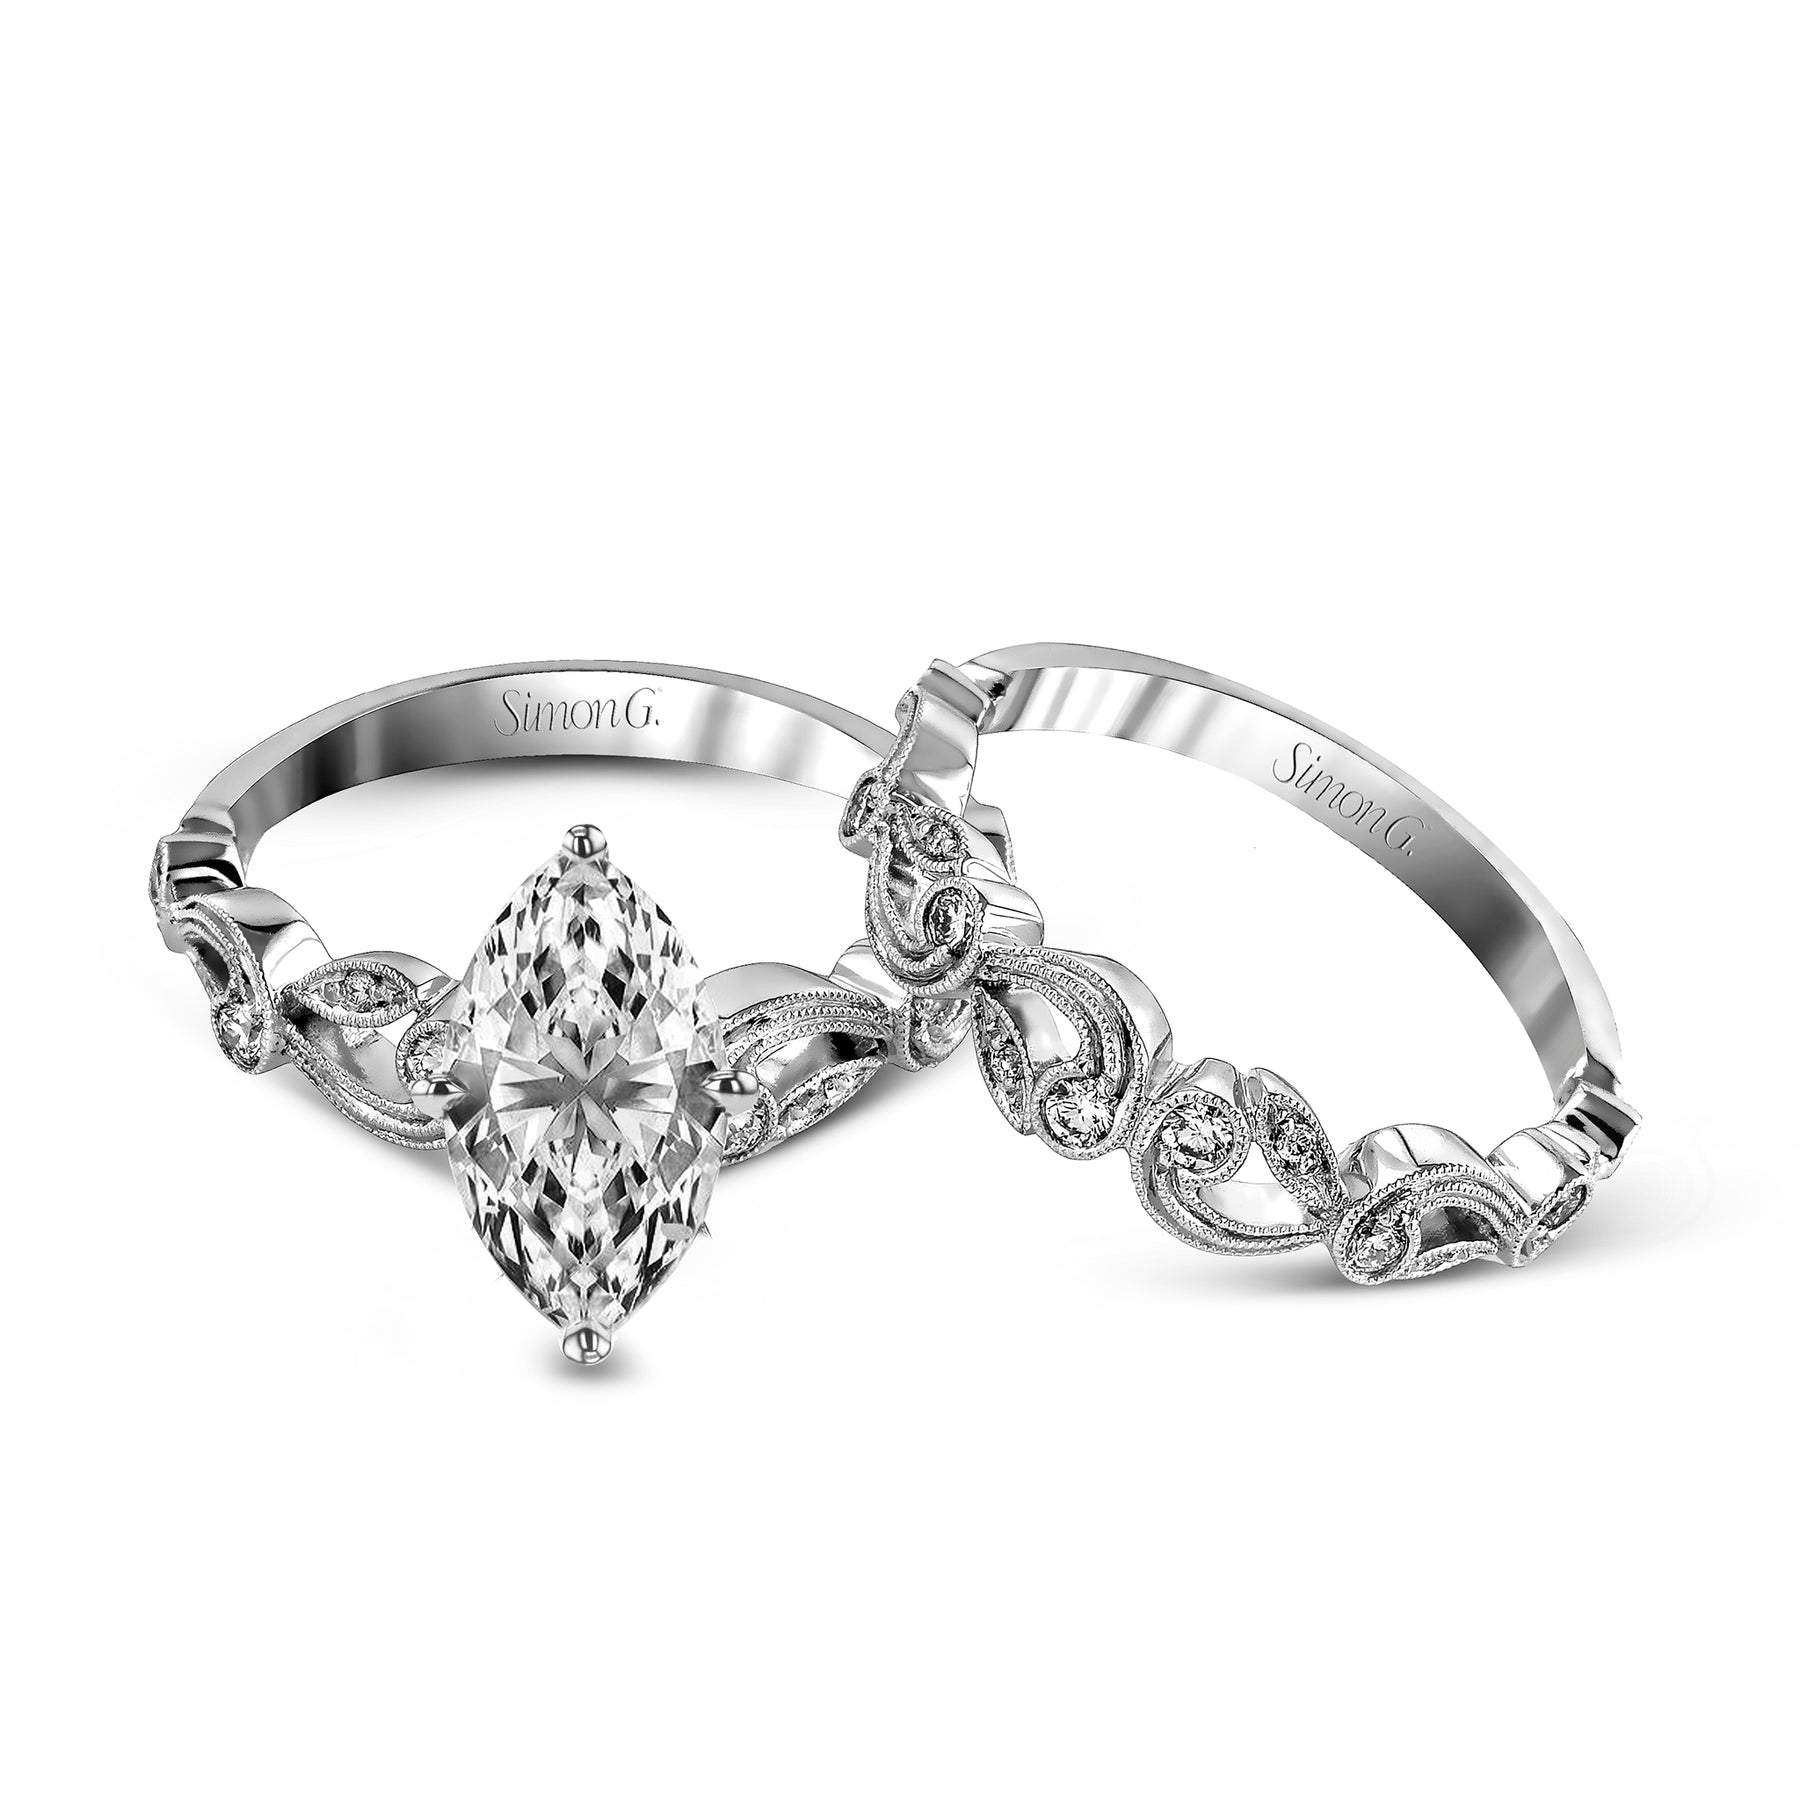 Marquise-cut Trellis Engagement Ring & Matching Wedding Band in 18k Gold with Diamonds TR473-MQ